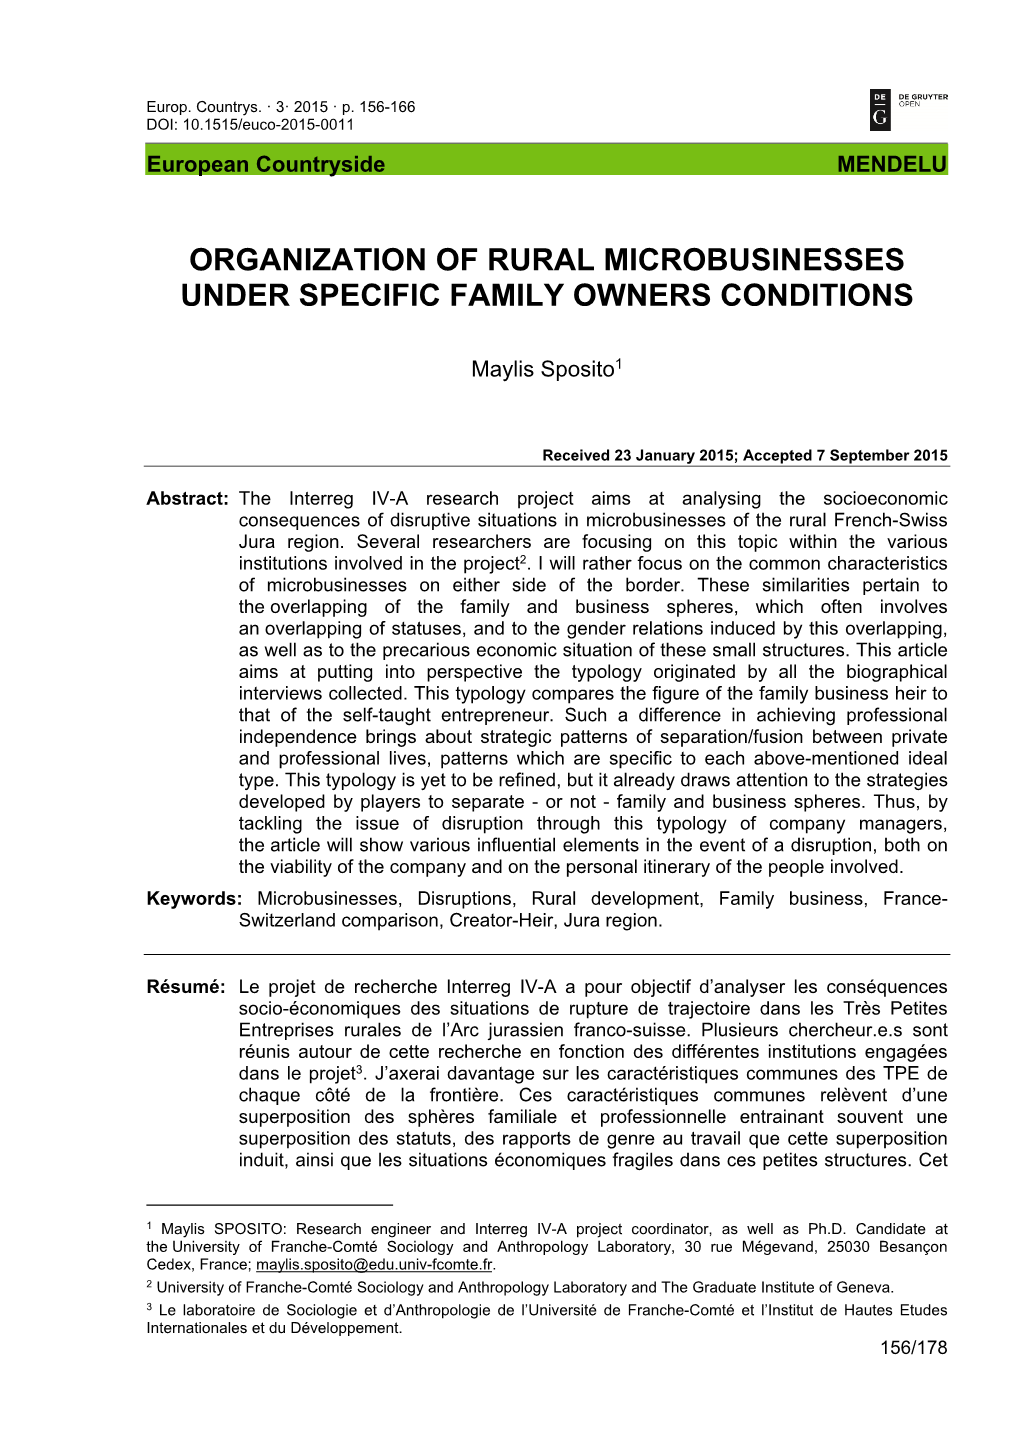 Organization of Rural Microbusinesses Under Specific Family Owners Conditions